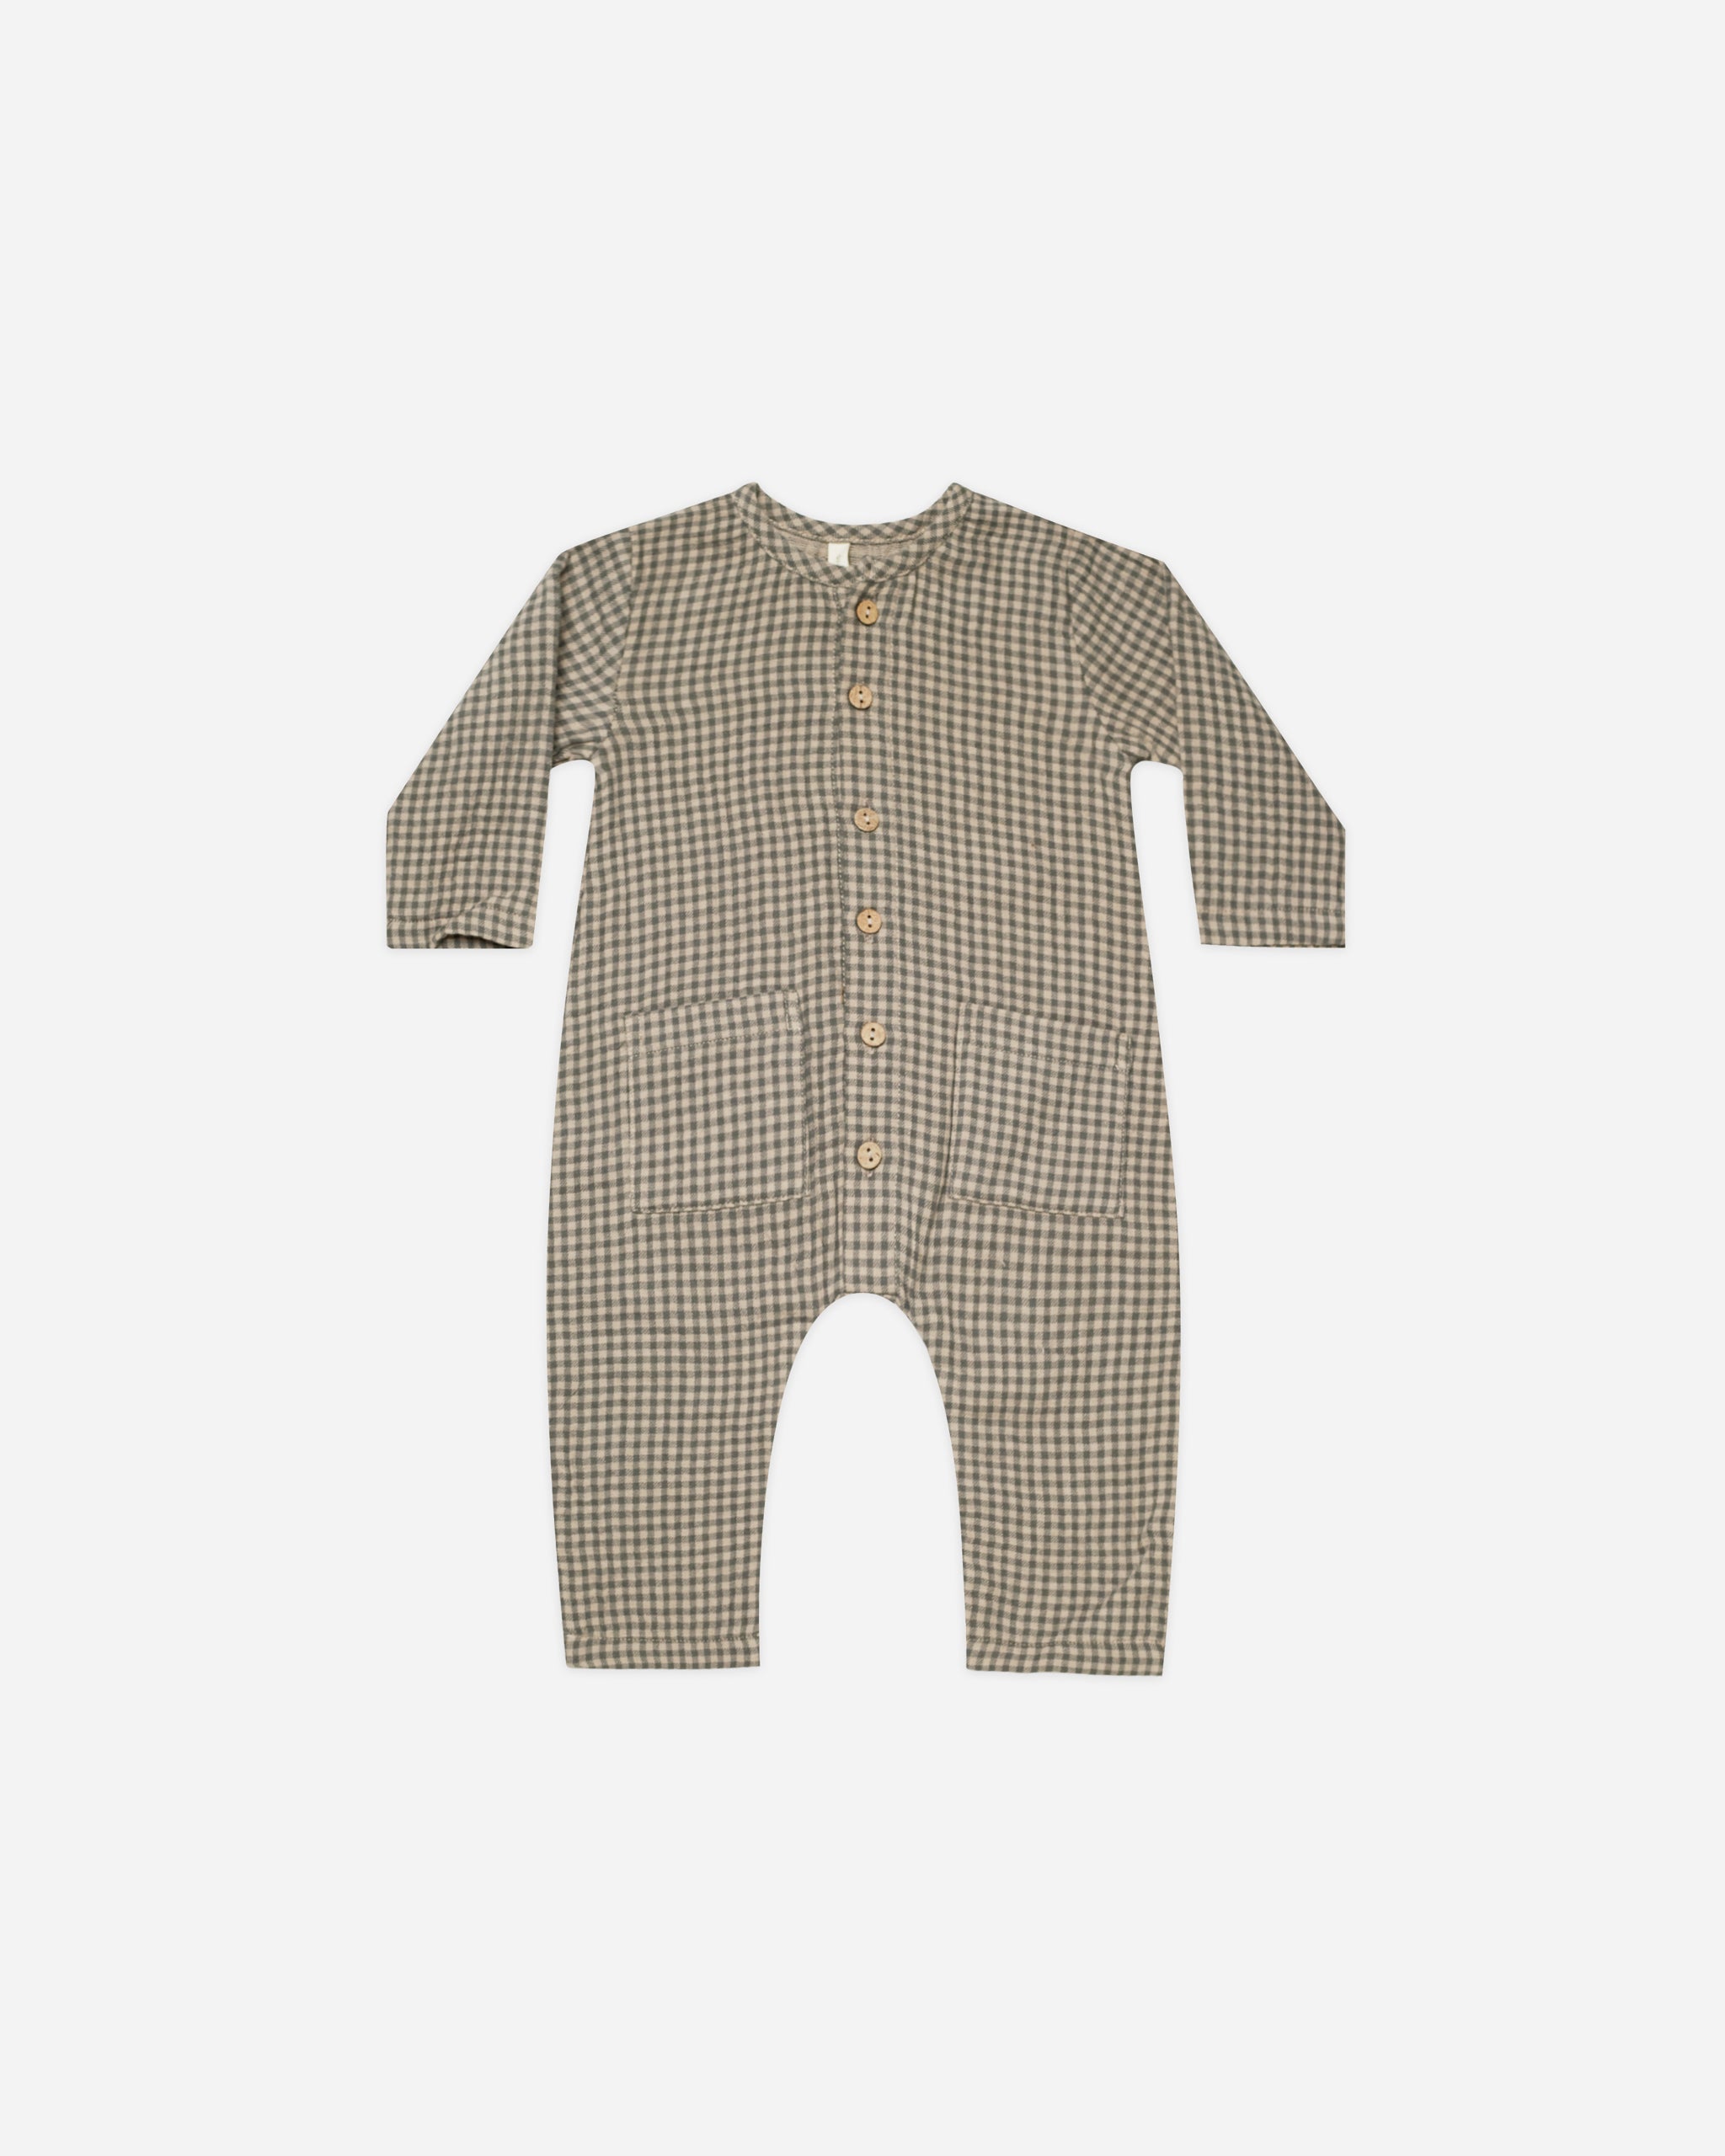 Pocketed Woven Jumpsuit || Forest Micro Plaid - Rylee + Cru | Kids Clothes | Trendy Baby Clothes | Modern Infant Outfits |